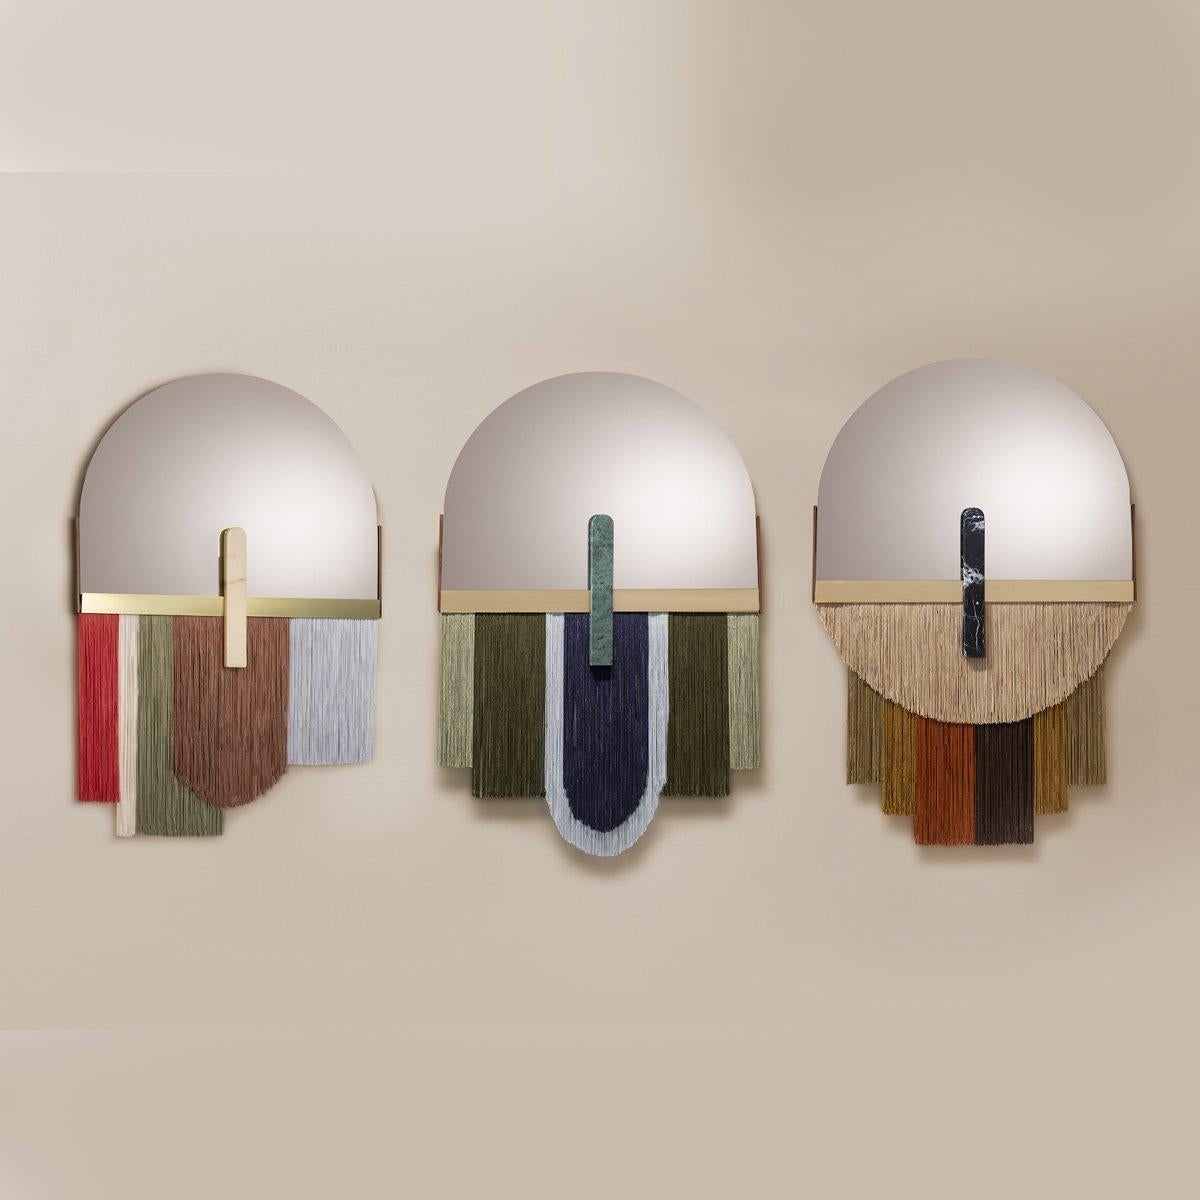 Souk papaya colorful wall mirror by DOOQ.
Dimensions
W 61 x H 97 cm.

Materials and finishes
Mirror in colored glass, edge in brass, detail in marble, fringe in fabric, back of the mirror in wood.
Product
Souk papaya mirror is a flamboyant